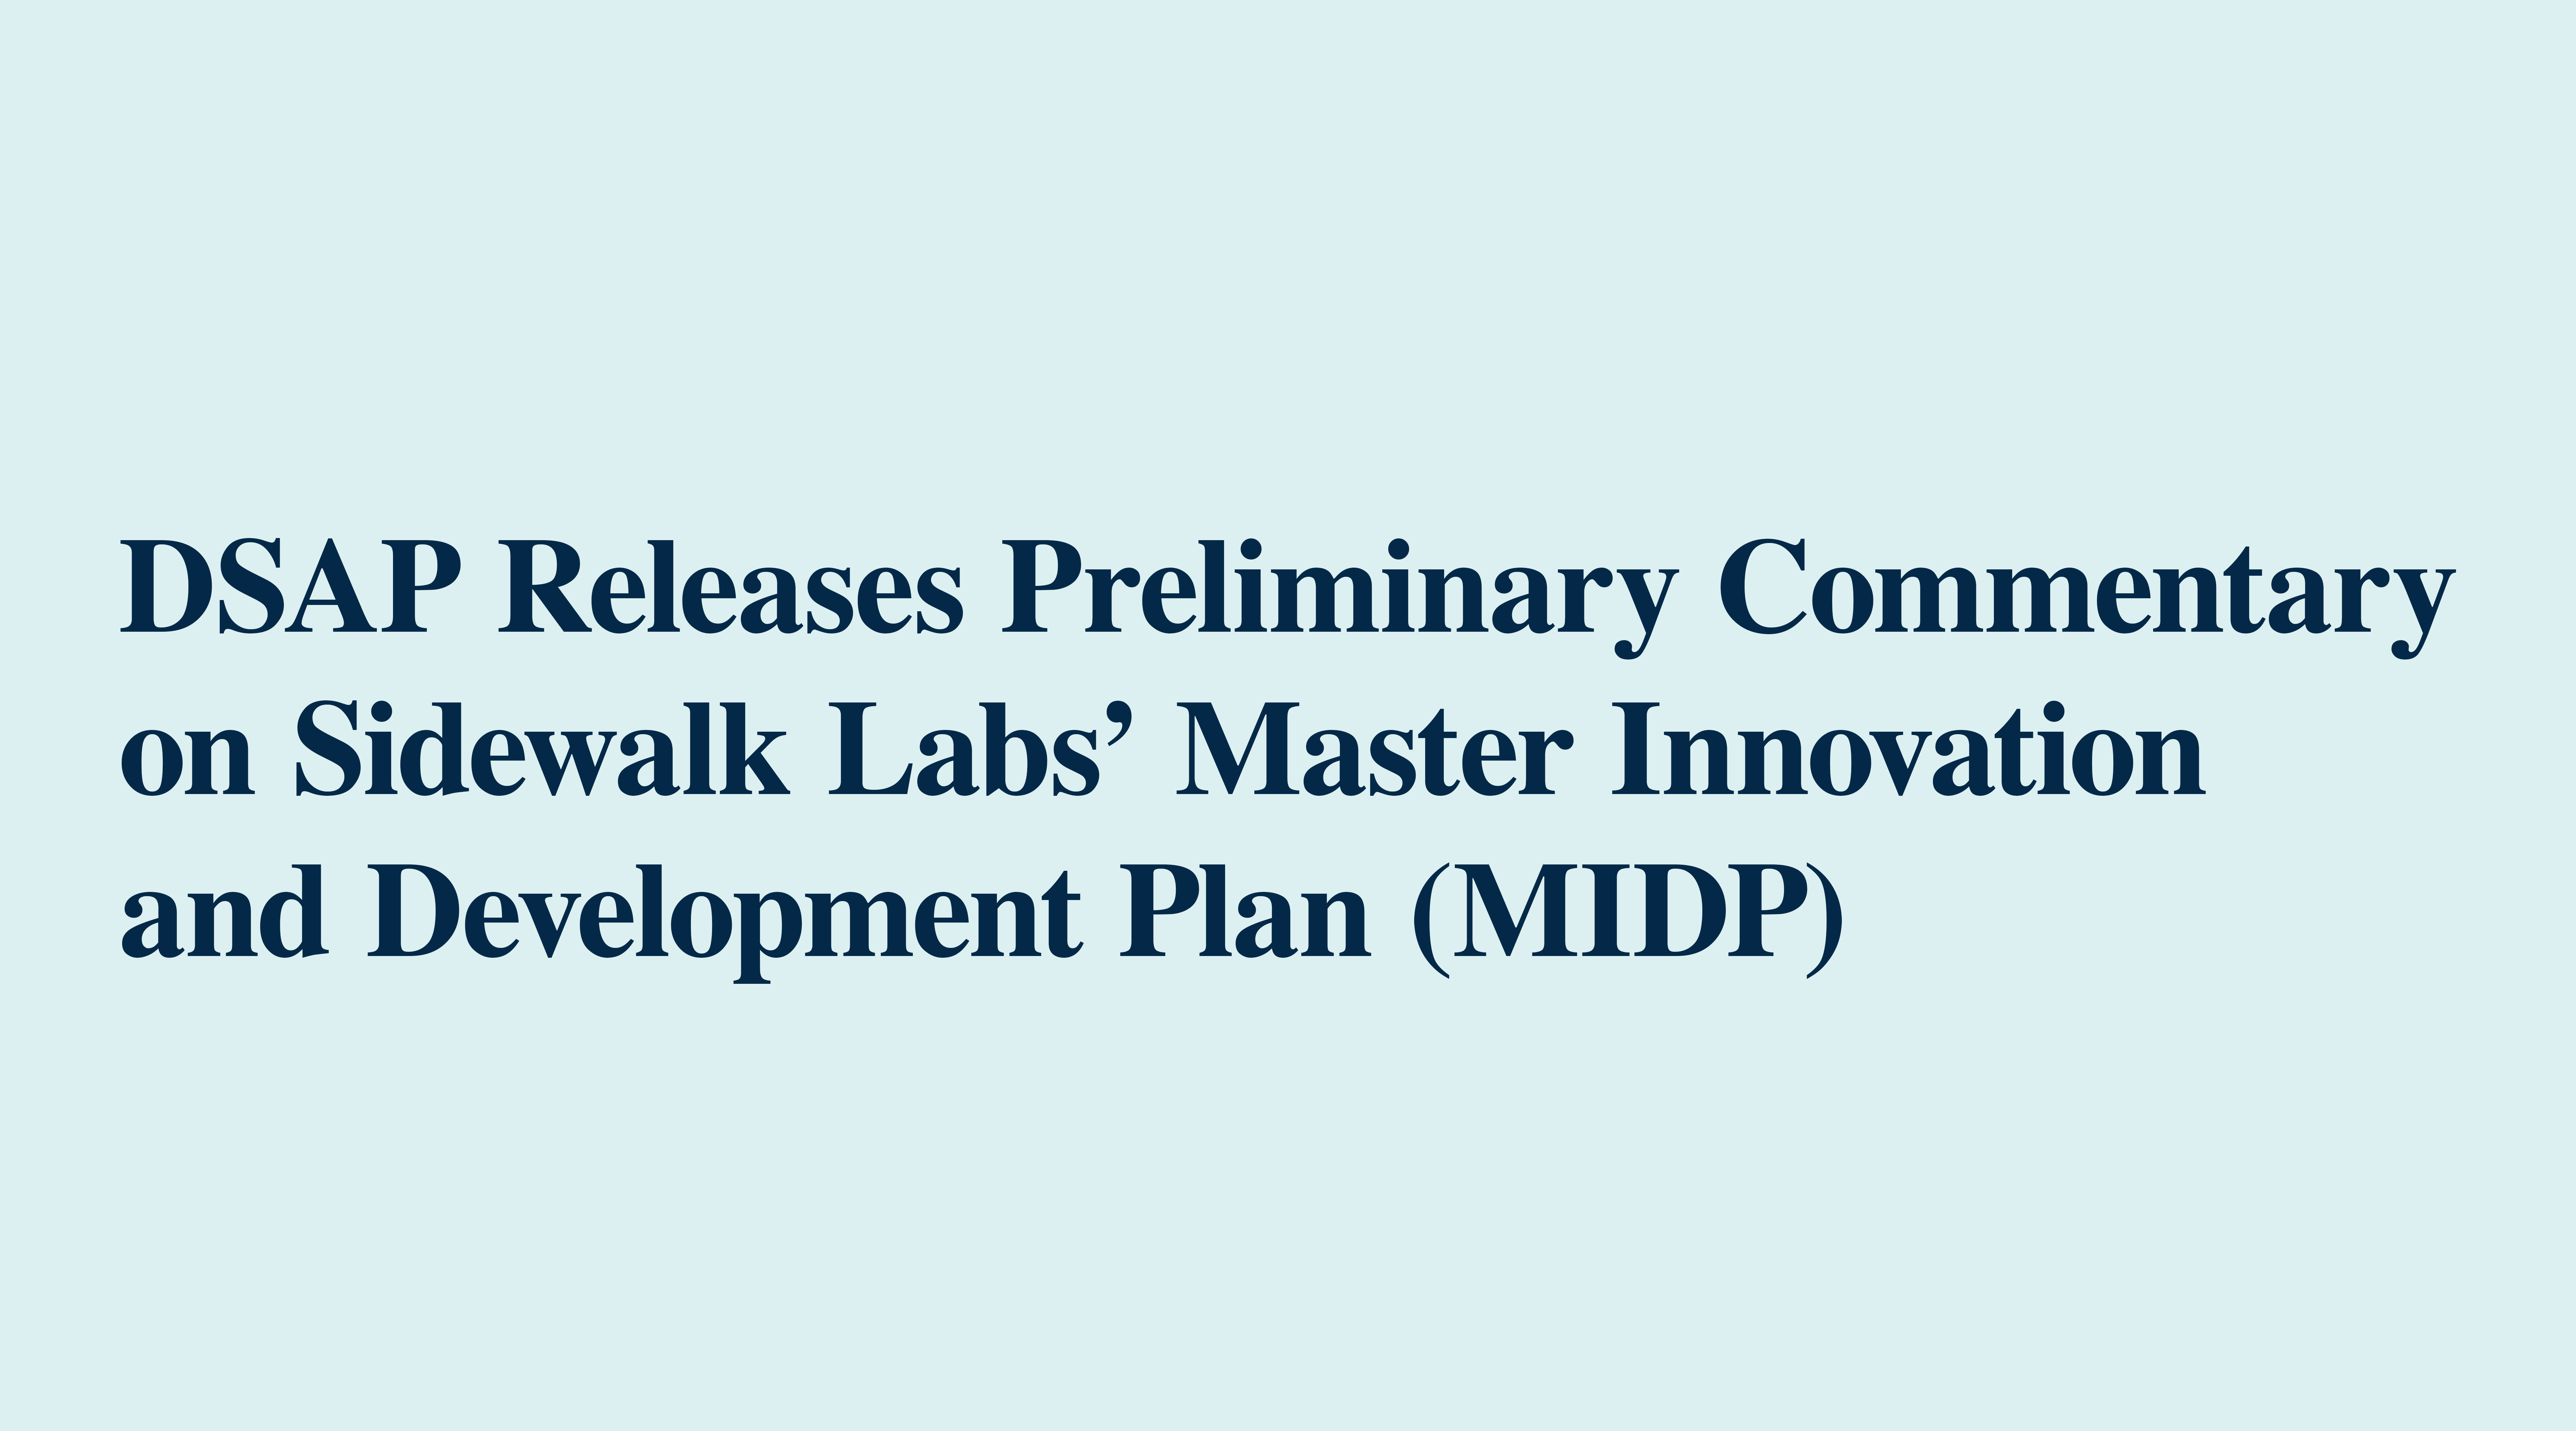 DSAP releases preliminary commentary on Sidewalk Labs' Master Innovation and Development Plan (MIDP)